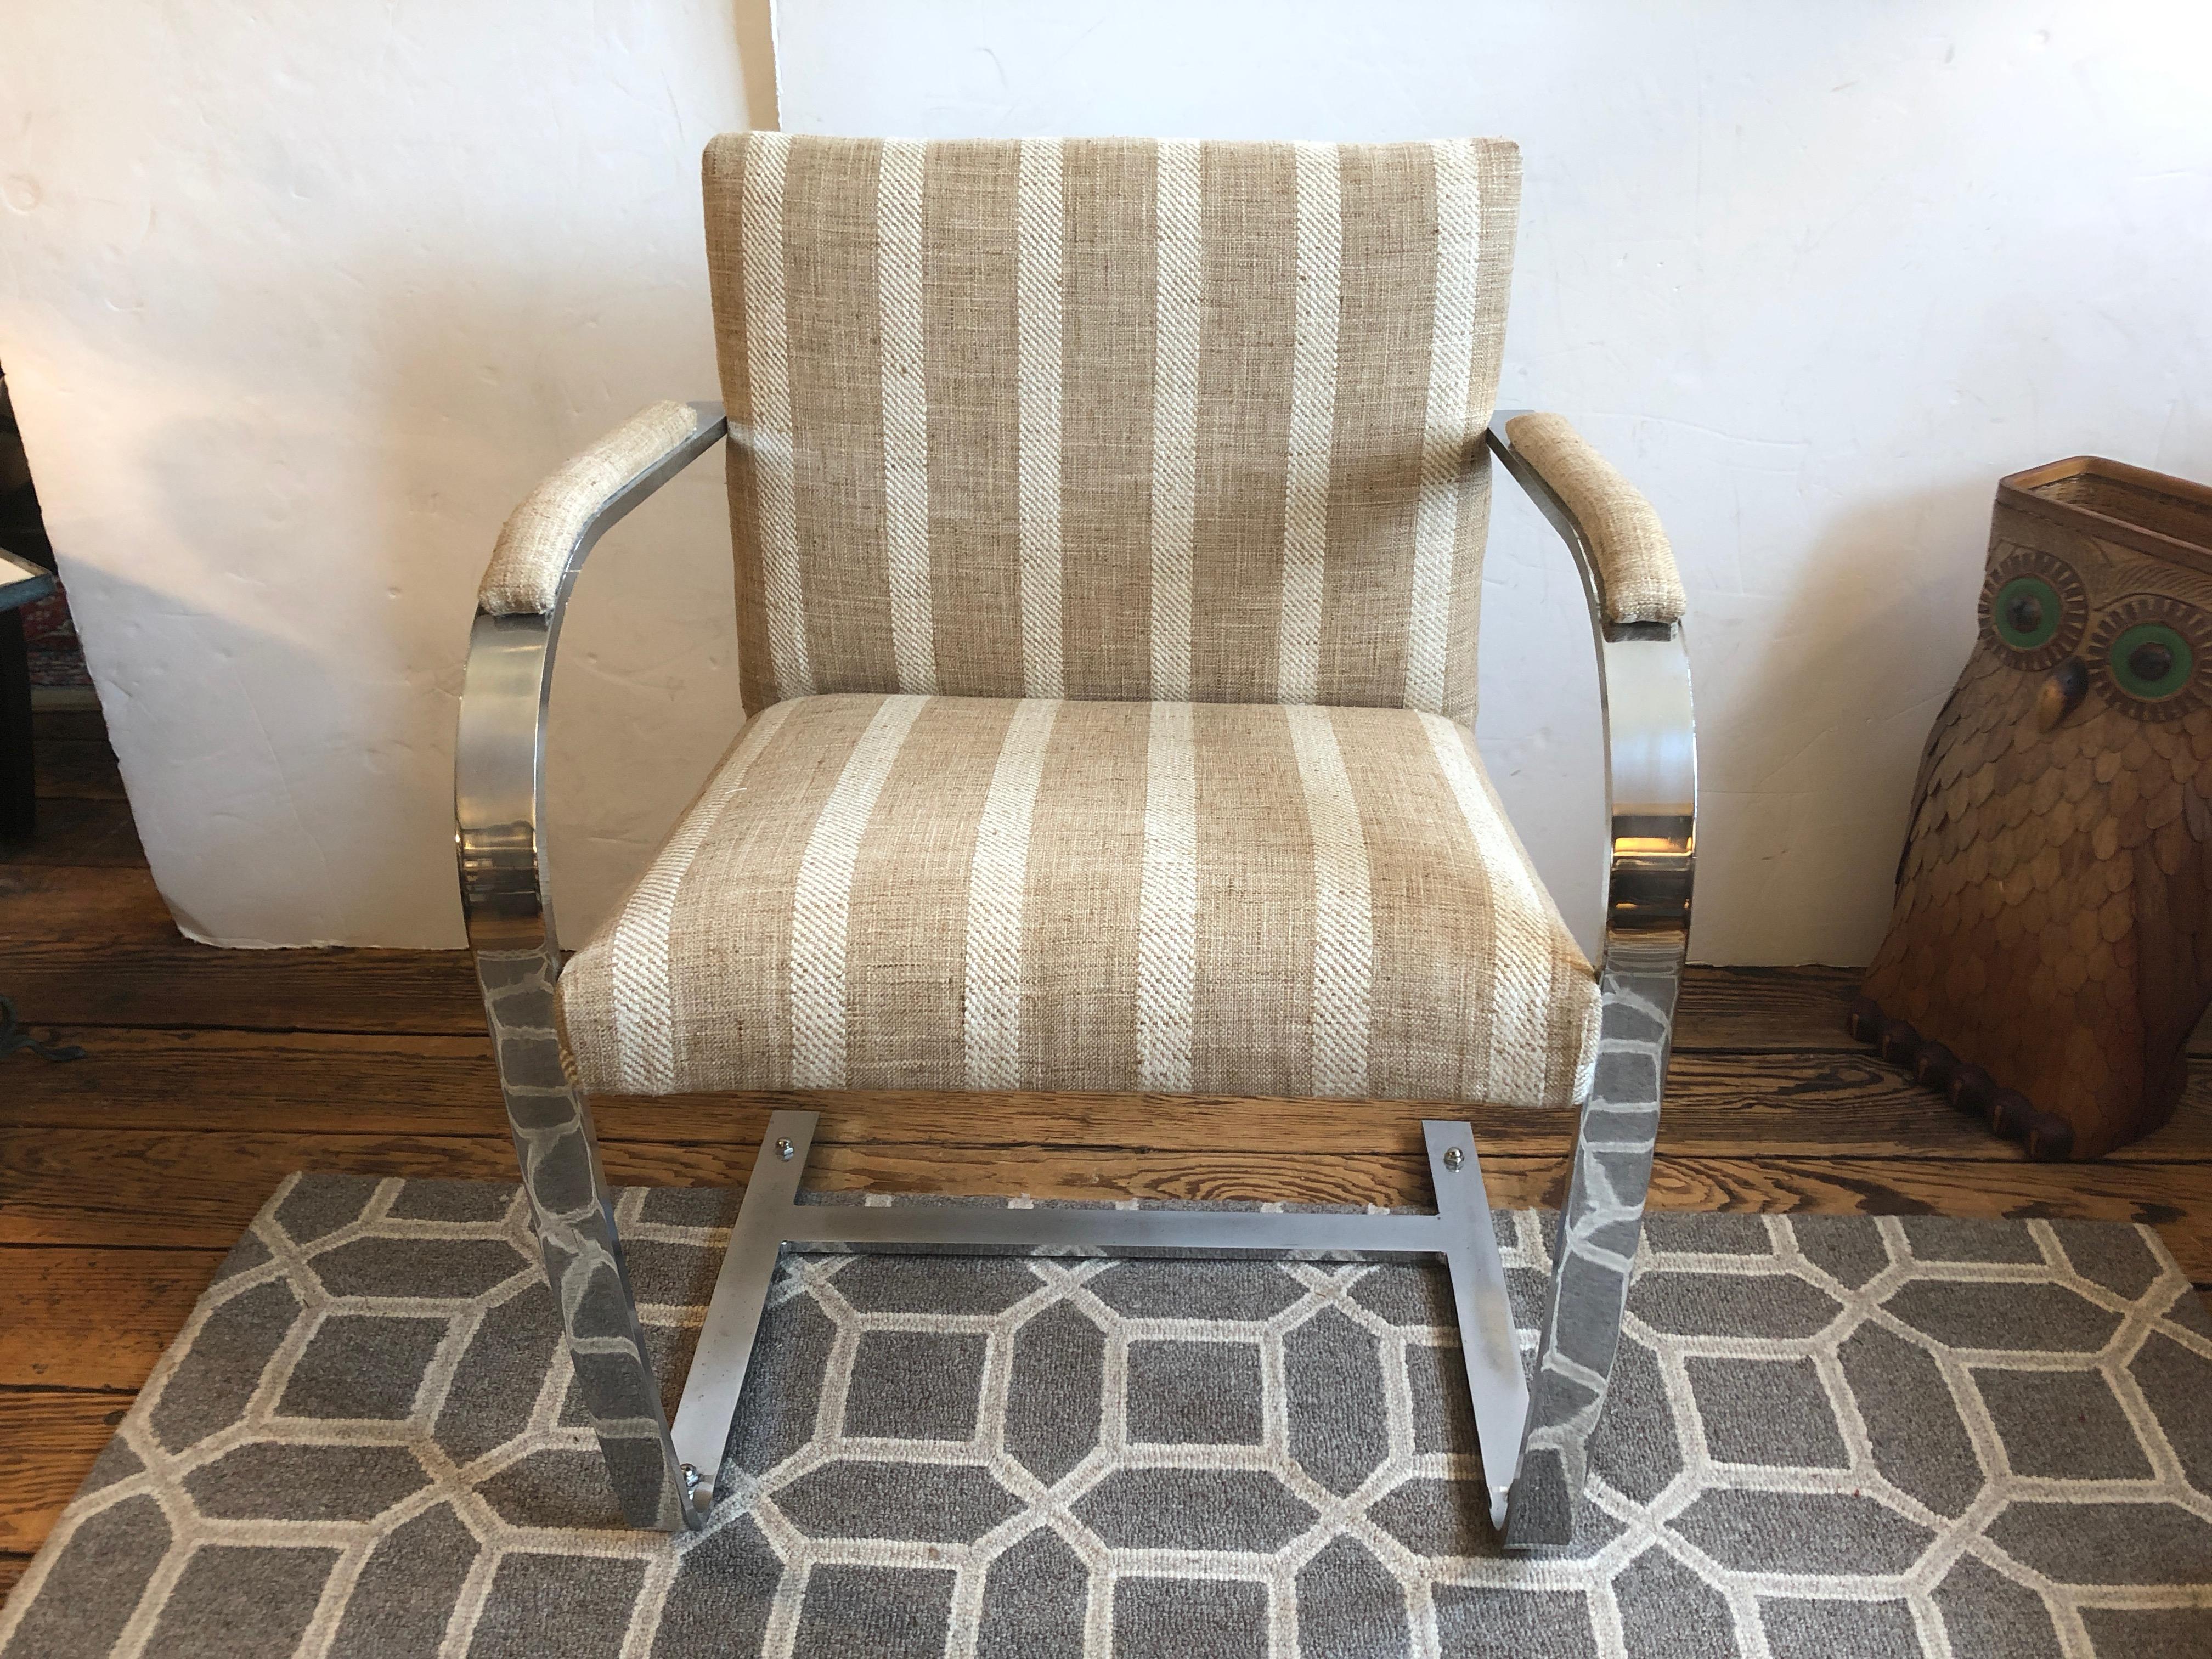 Handsome pair of Mid-Century Modern armchairs in the style of Milo Baughman having heavy chrome curved arms and base, recently upholstered in a neutral chic nubby striped tan and white striped fabric.